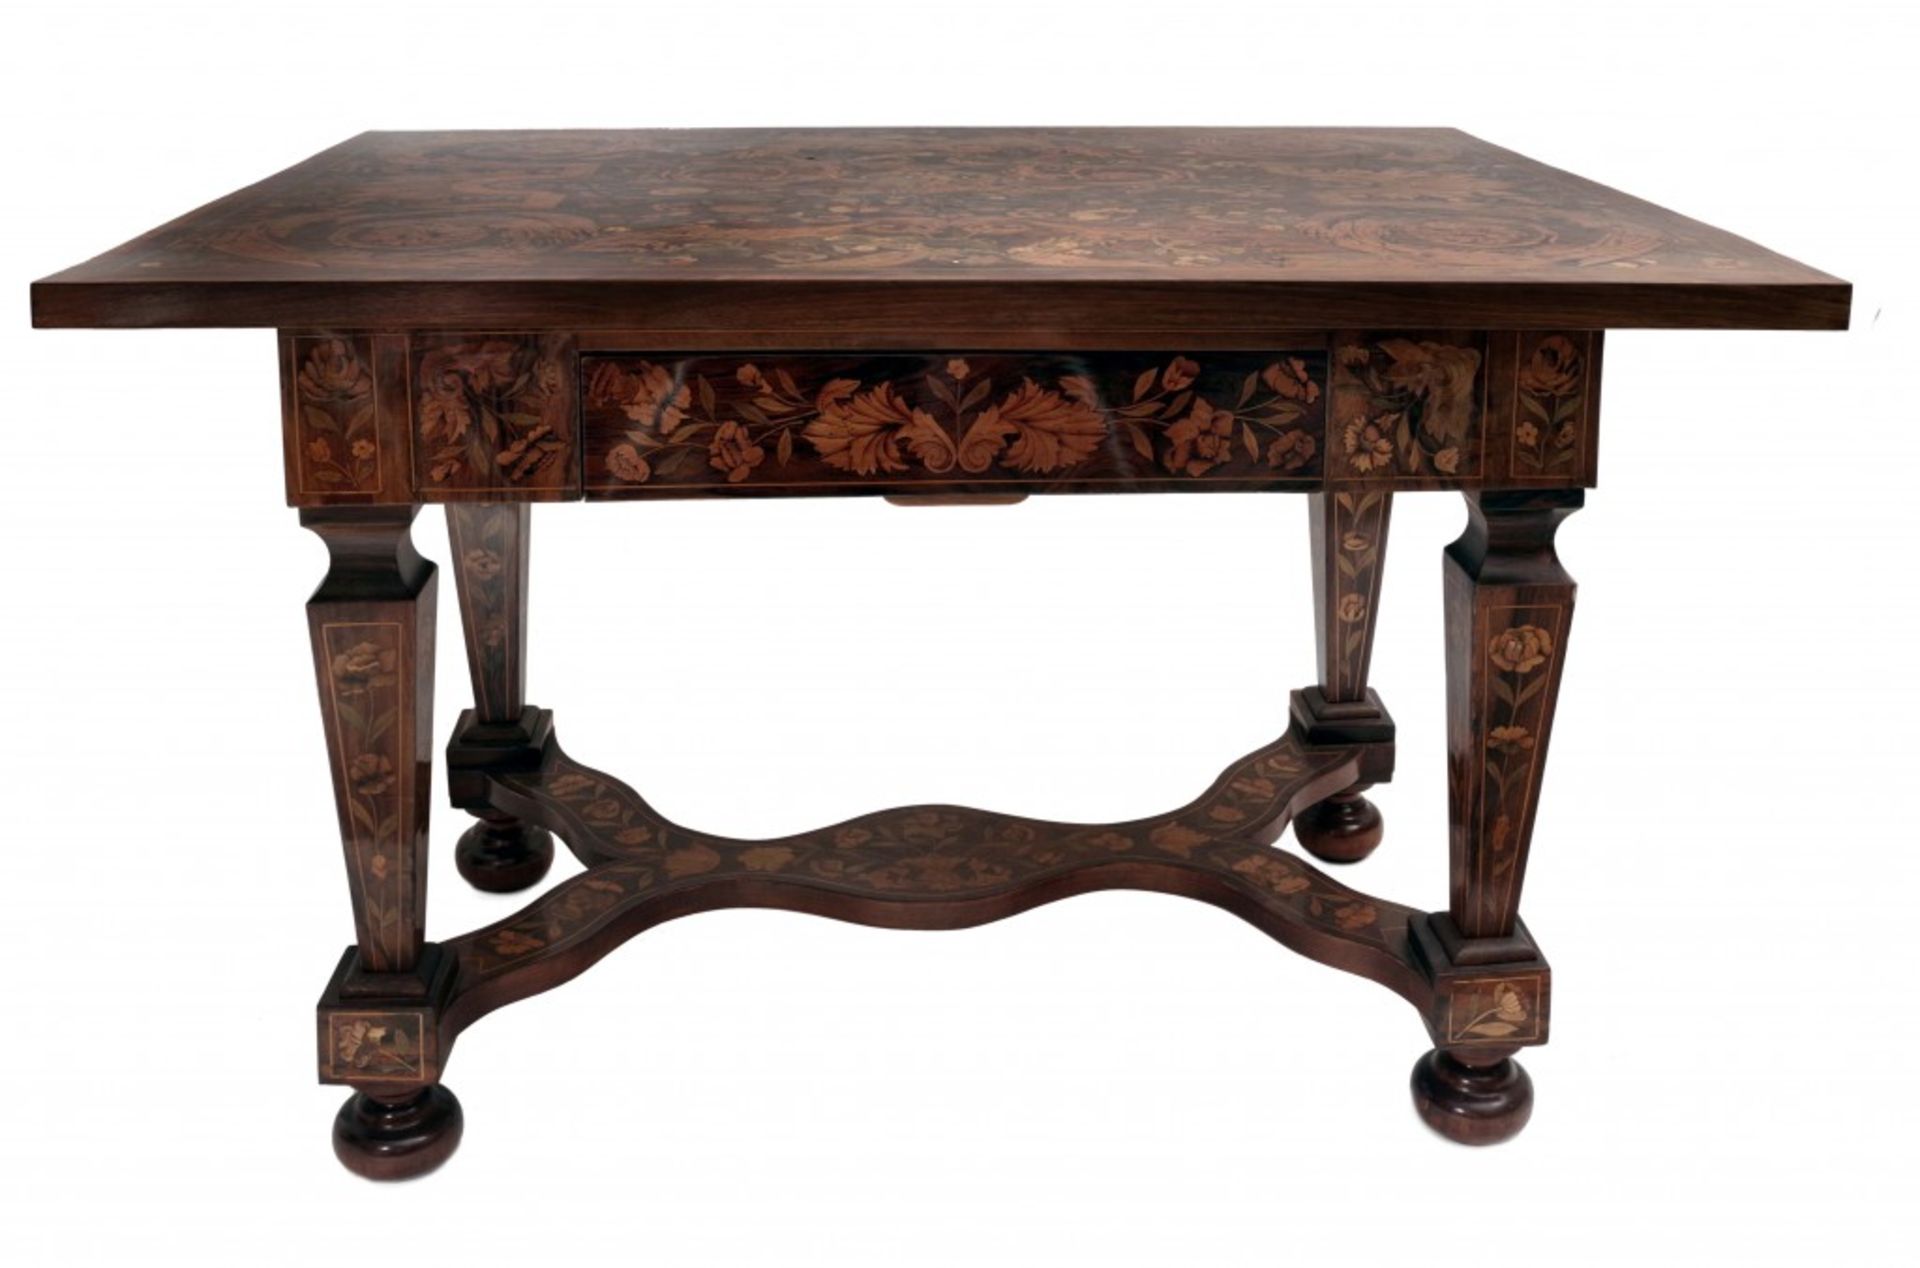 Rare  Dutch Marquetry Table - Image 3 of 4